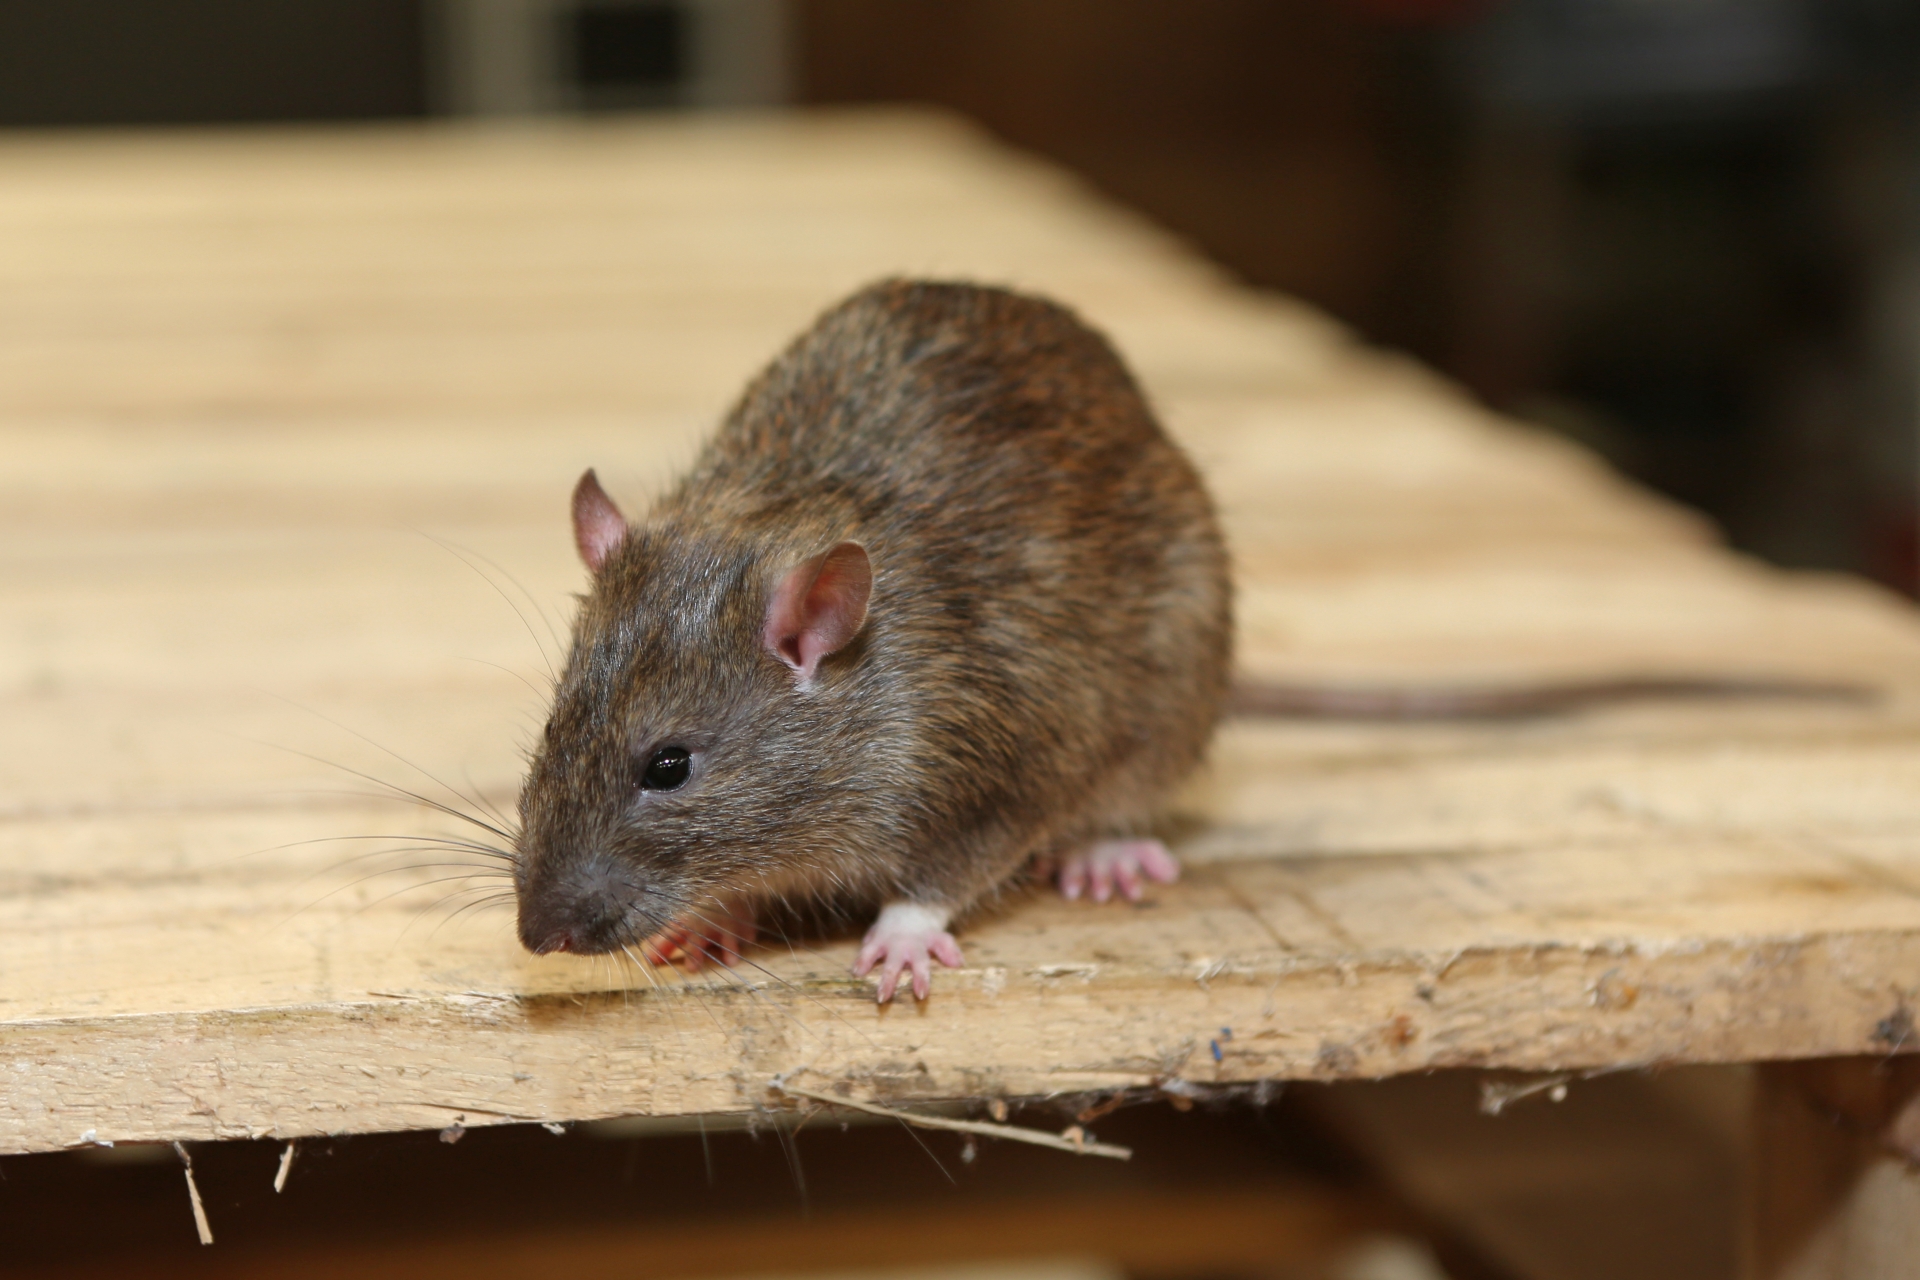 Rat extermination, Pest Control in Alexandra Palace, Wood Green, N22. Call Now 020 8166 9746